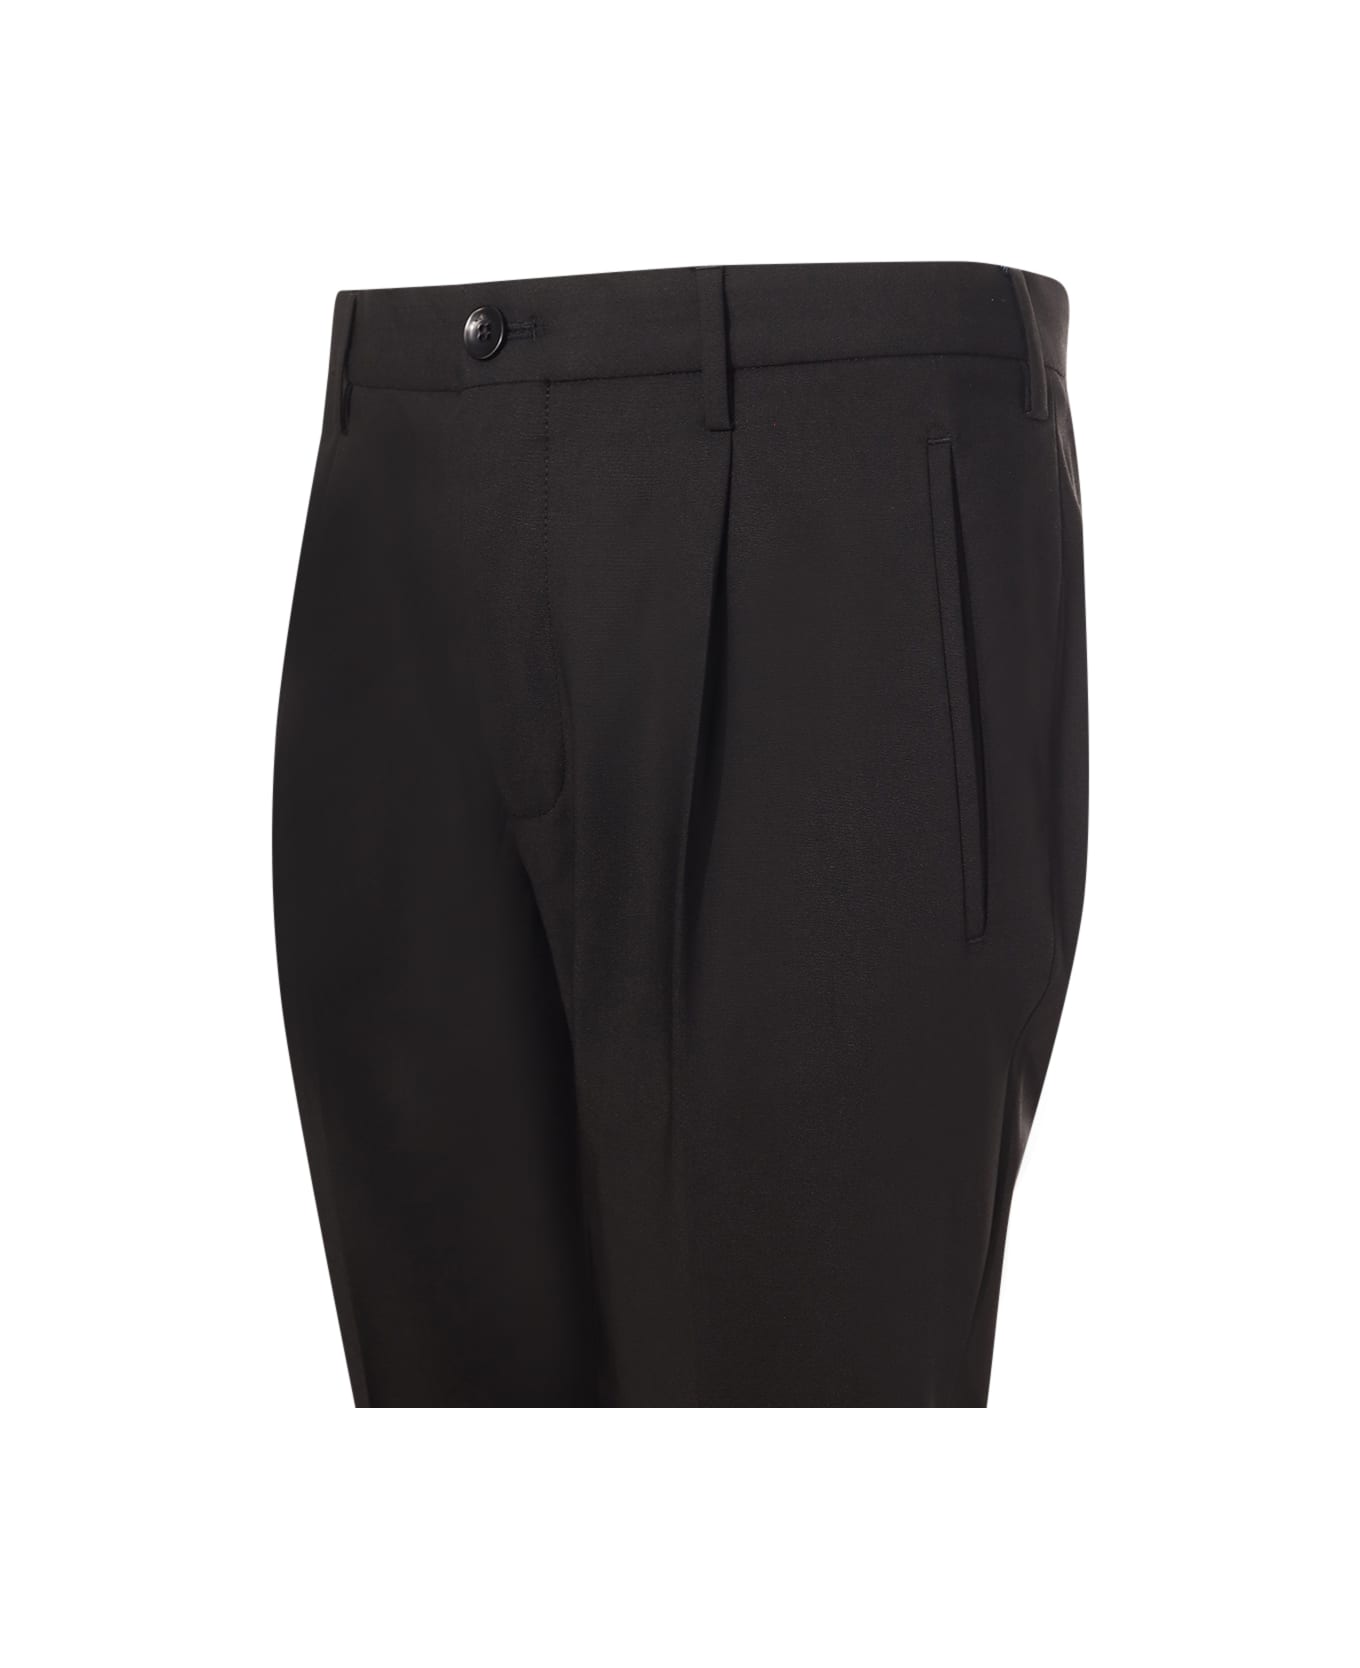 Incotex Trousers With Pleats - Black